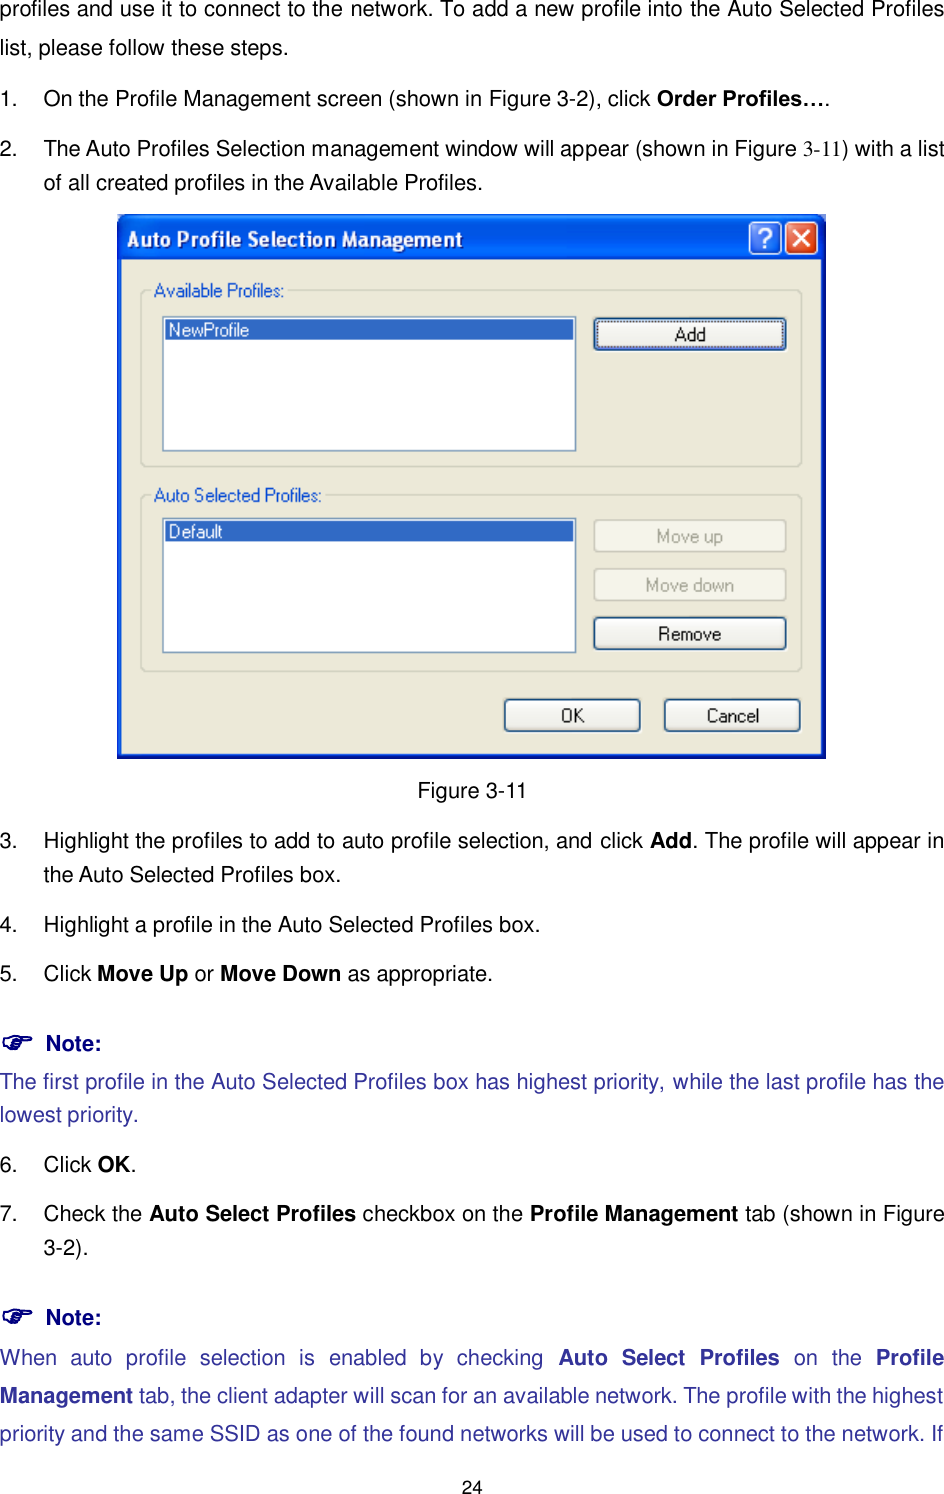  24 profiles and use it to connect to the network. To add a new profile into the Auto Selected Profiles list, please follow these steps. 1.  On the Profile Management screen (shown in XFigure 3-2X), click Order Profiles…. 2.  The Auto Profiles Selection management window will appear (shown in XFigure 3-11) with a list of all created profiles in the Available Profiles.  Figure 3-11 3.  Highlight the profiles to add to auto profile selection, and click Add. The profile will appear in the Auto Selected Profiles box. 4.  Highlight a profile in the Auto Selected Profiles box. 5.  Click Move Up or Move Down as appropriate.    Note: The first profile in the Auto Selected Profiles box has highest priority, while the last profile has the lowest priority. 6.  Click OK. 7.  Check the Auto Select Profiles checkbox on the Profile Management tab (shown in XFigure 3-2).  Note: When  auto  profile  selection  is  enabled  by  checking  Auto  Select  Profiles on  the  Profile Management tab, the client adapter will scan for an available network. The profile with the highest priority and the same SSID as one of the found networks will be used to connect to the network. If 